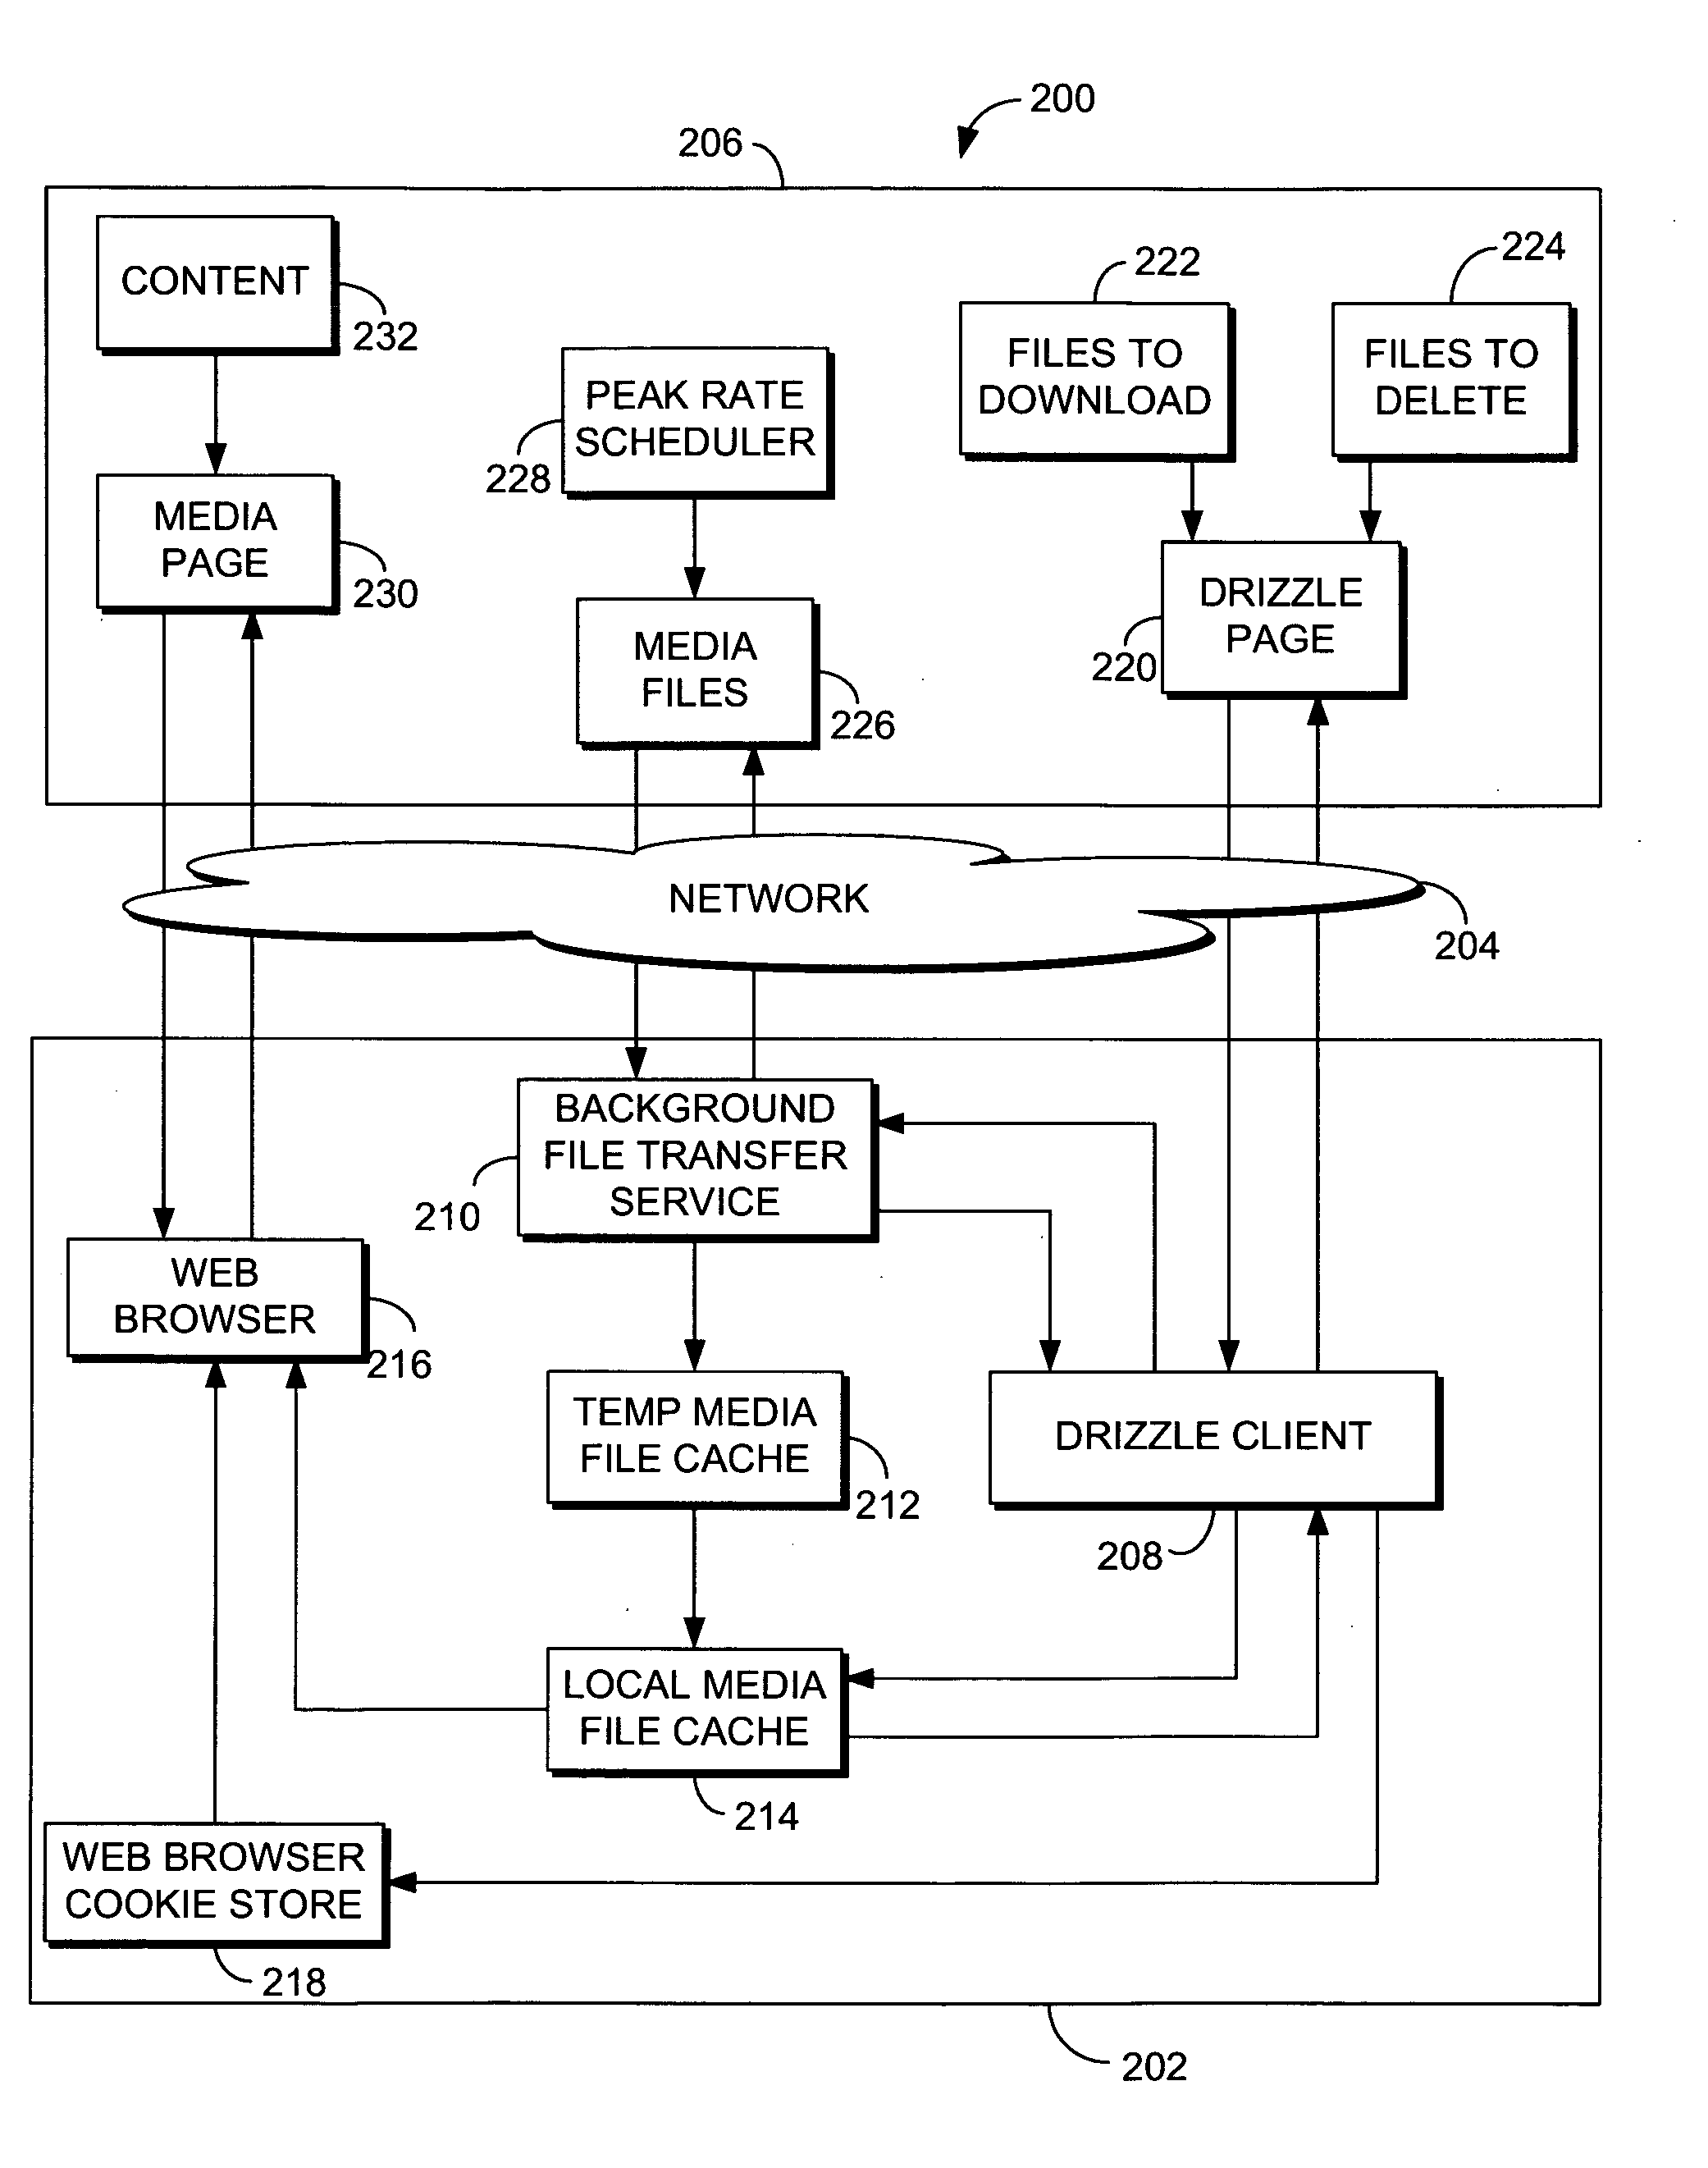 System and method for transferring a file in advance of its use